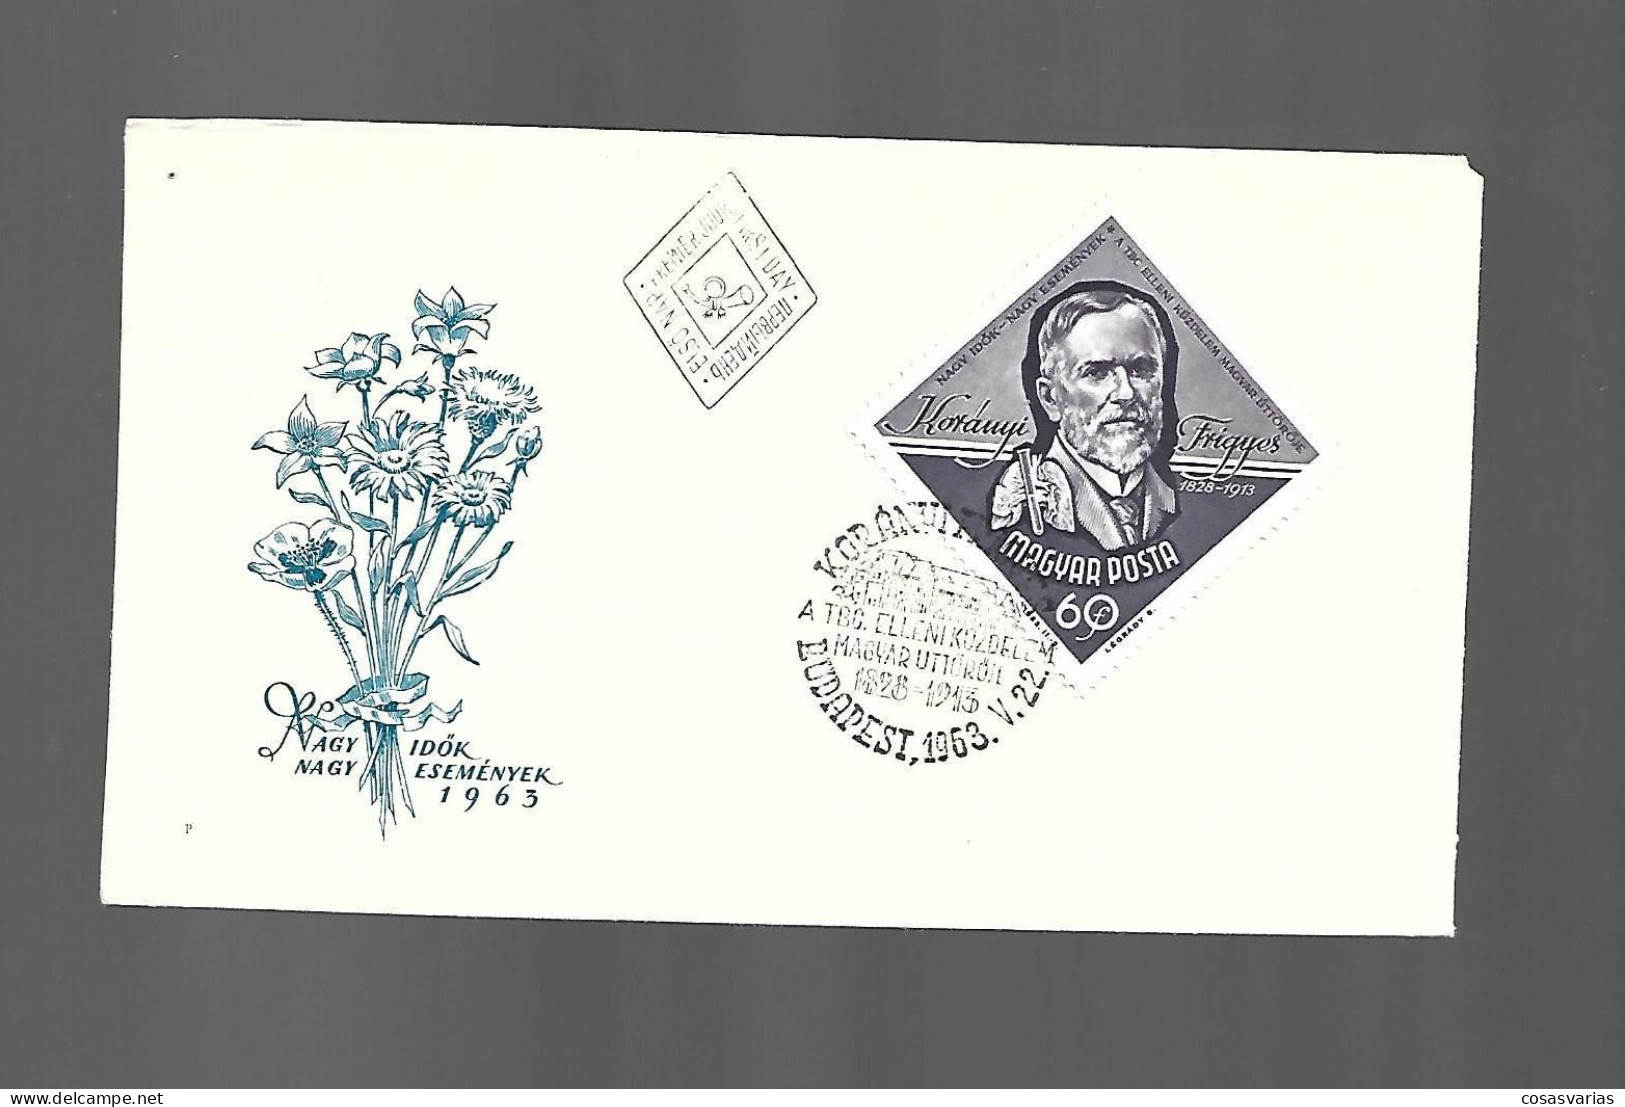 HUNGRIA MAGYAR POSTA 1963 FIRST DAY OF ISSUE PREMIER JOUR EMISSION - FDC